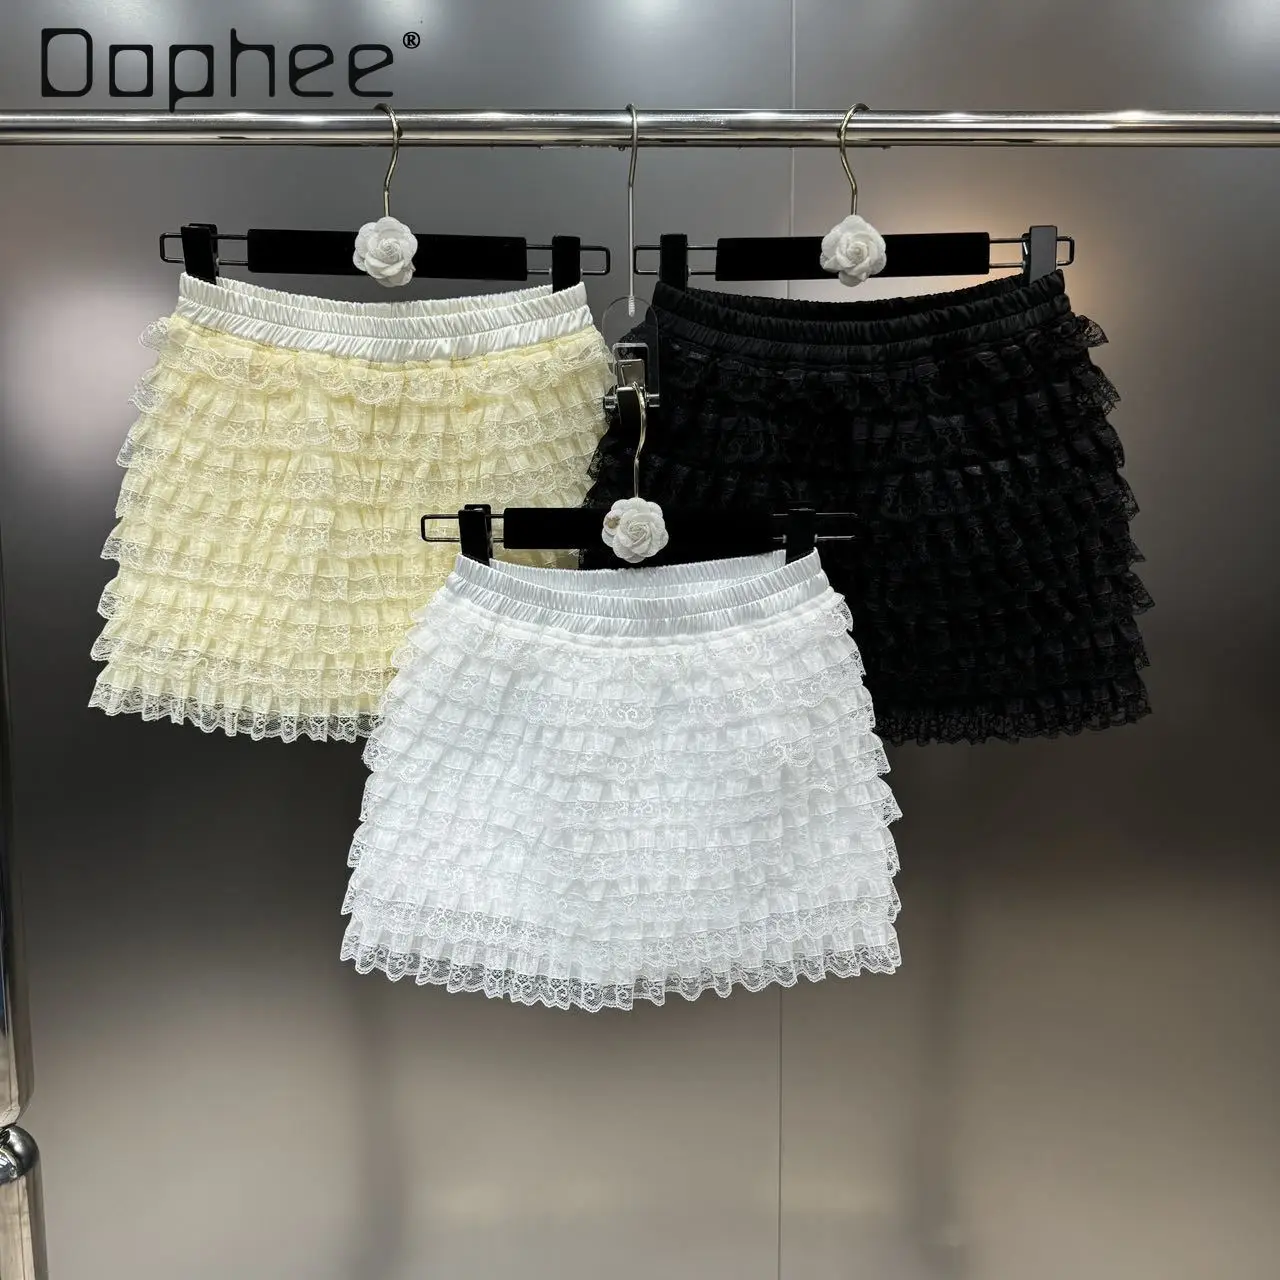 Women's Double Layer Mini Cake Skirt 2024 Early Spring New Sweet Elastic Waist High Waisted Slimming Lace Stitching Bubble Skirt 6pcs baby mini inertia truck engineering van toy set early educational toys for toddlers babies kids gift engineering vehicle